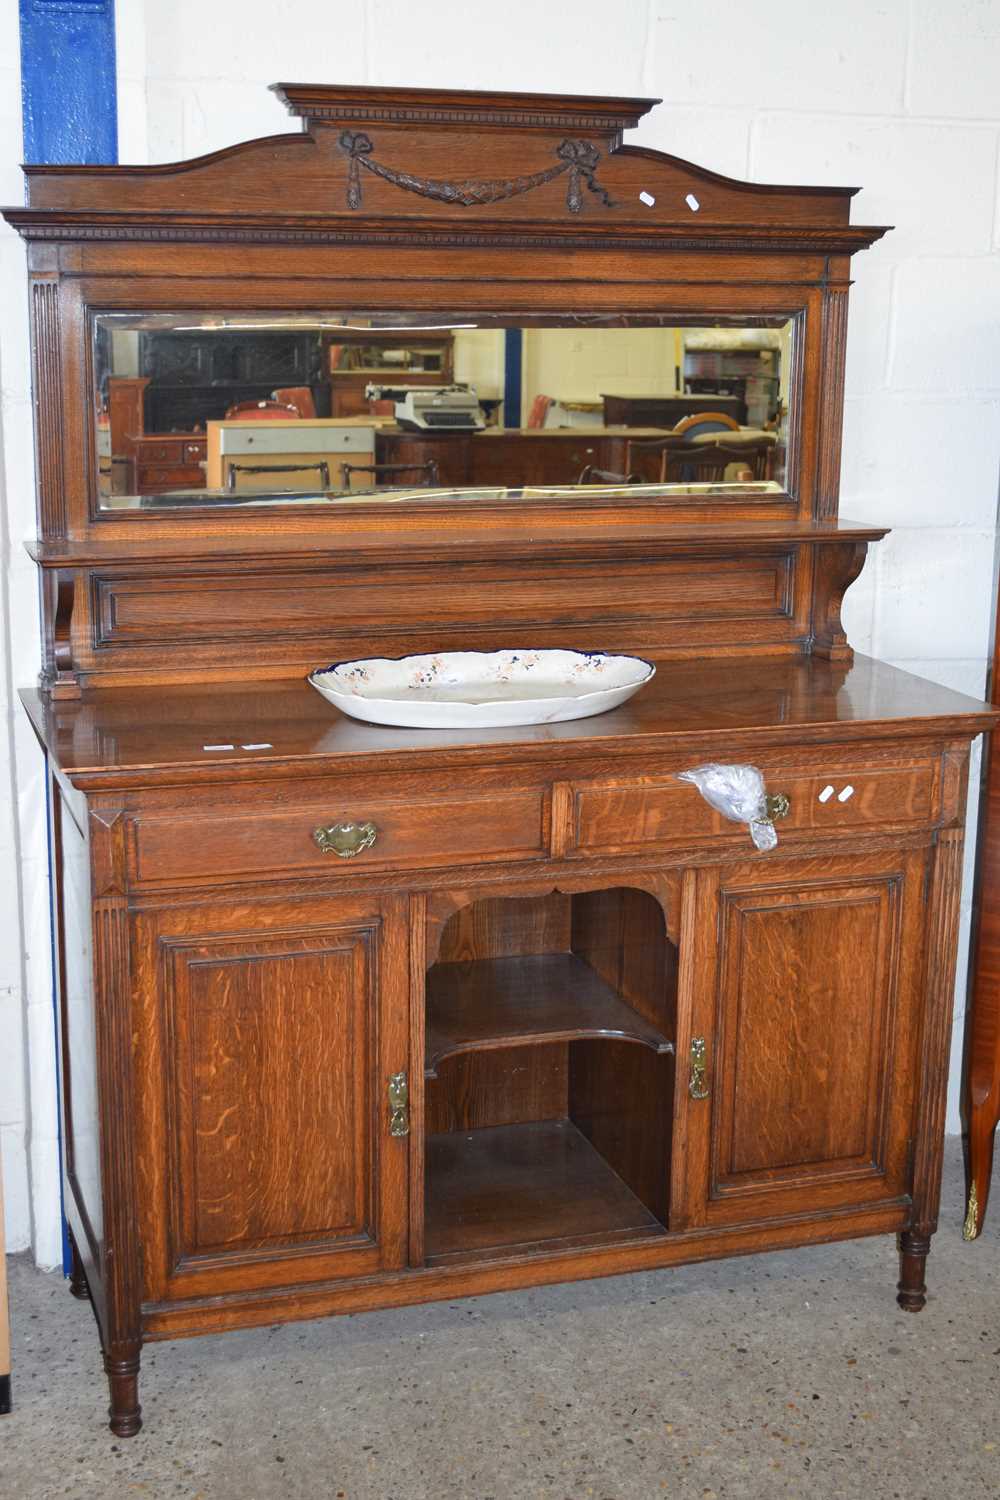 LATE 19TH CENTURY OAK MIRROR BACK SIDEBOARD WITH TWO DRAWERS AND TWO DOORS, 137CM WIDE